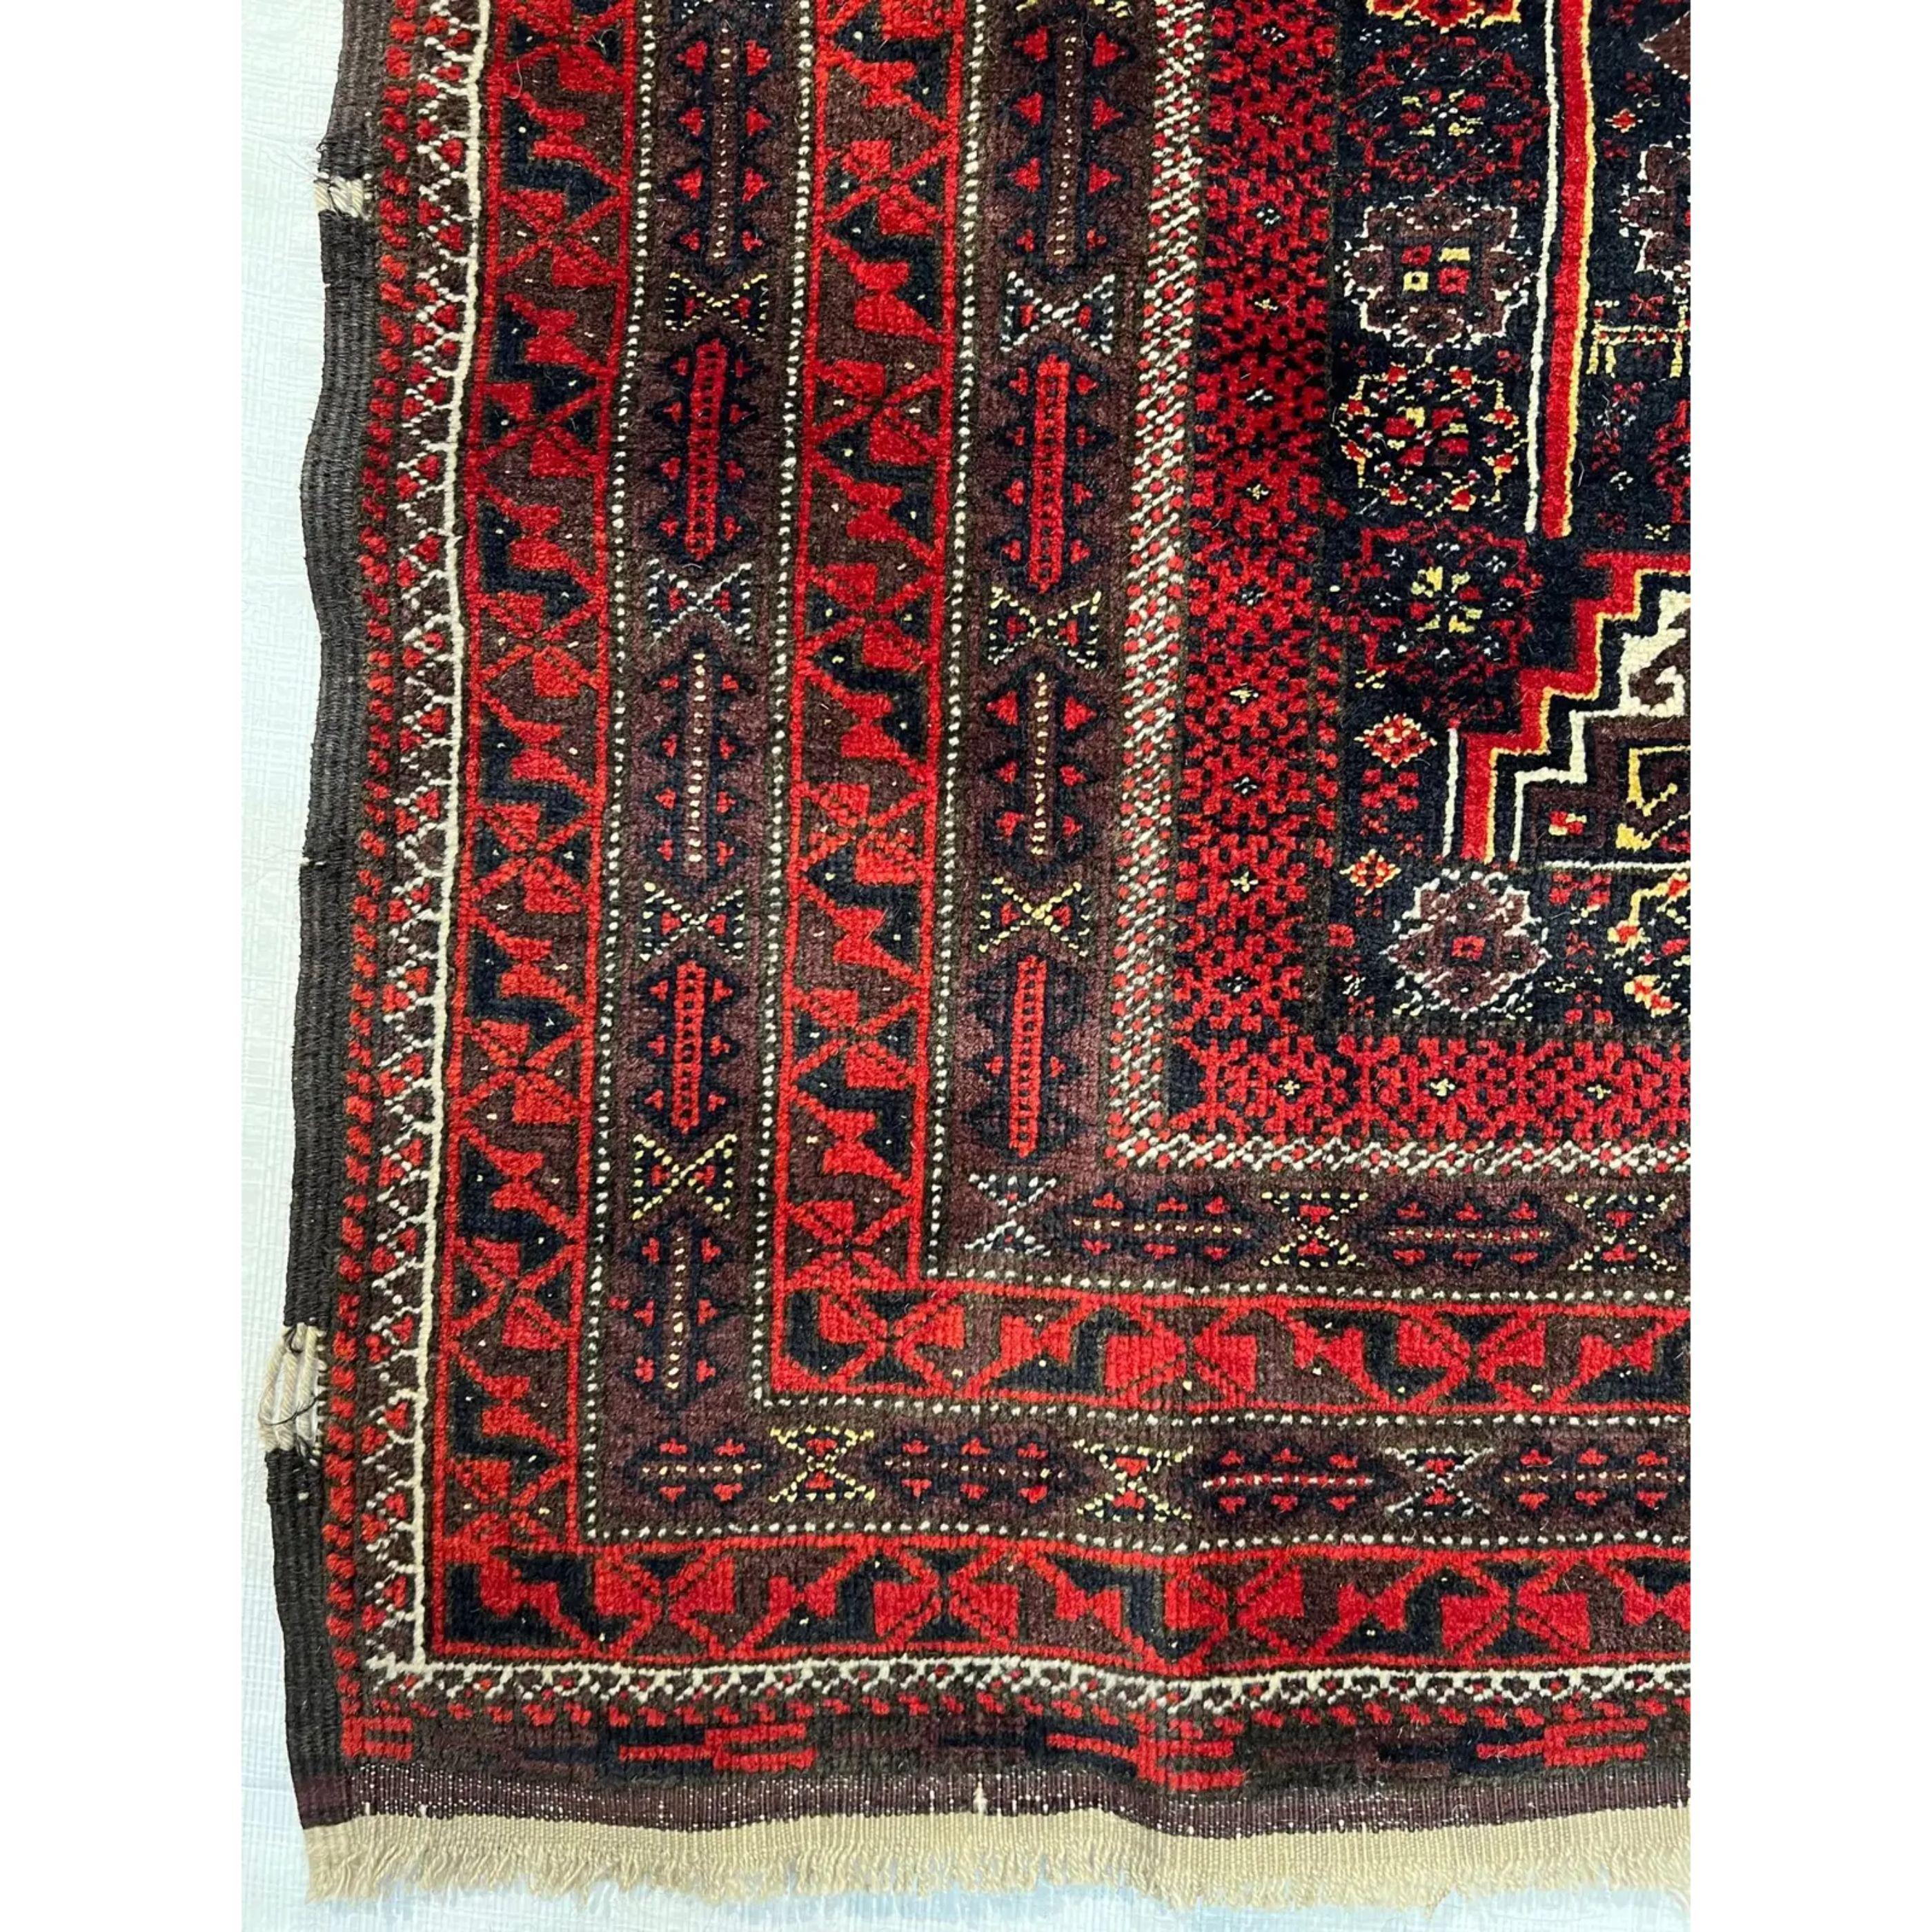 1900s Antique Persian Baloutch Rug, handmade and hand-knotted tribal carpet